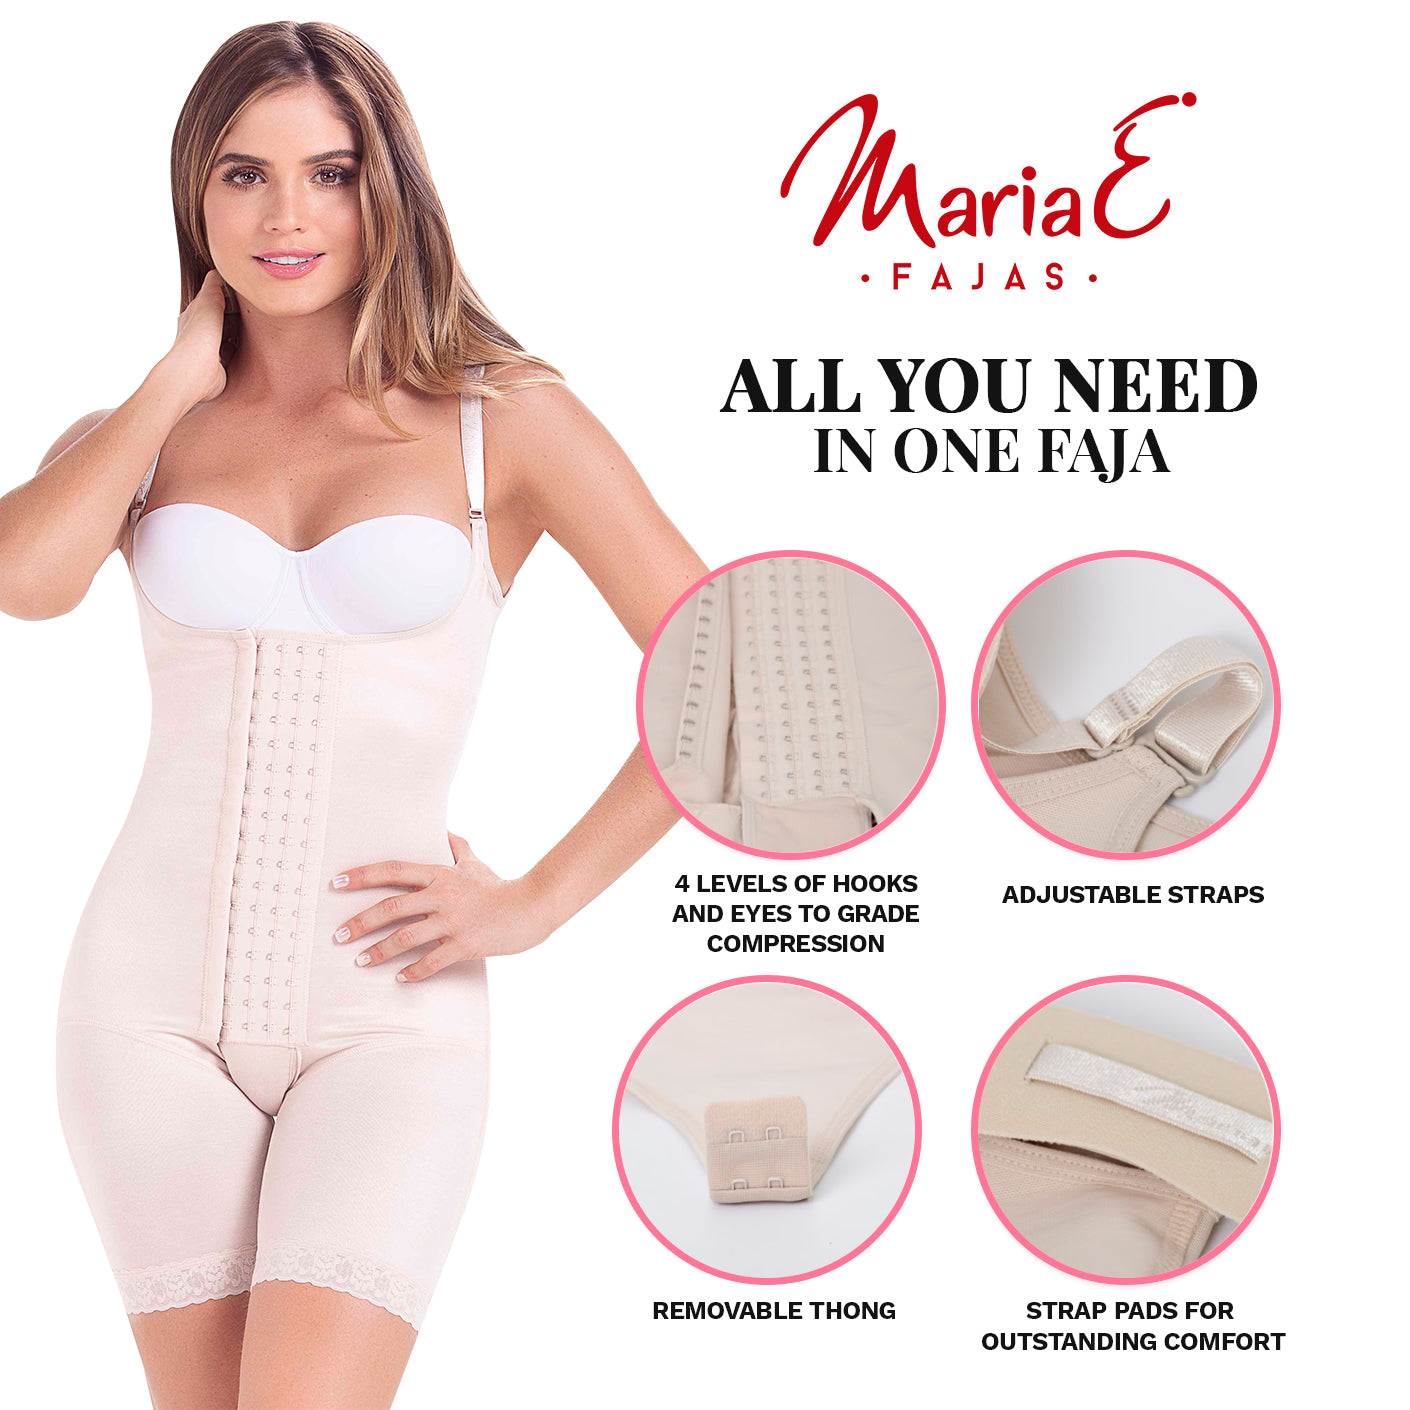 Post-Surgery BBL and Liposuction Faja with High Compression, Open Bust, & Mid-Thigh Length MariaE 9182-5-Shapes Secrets Fajas